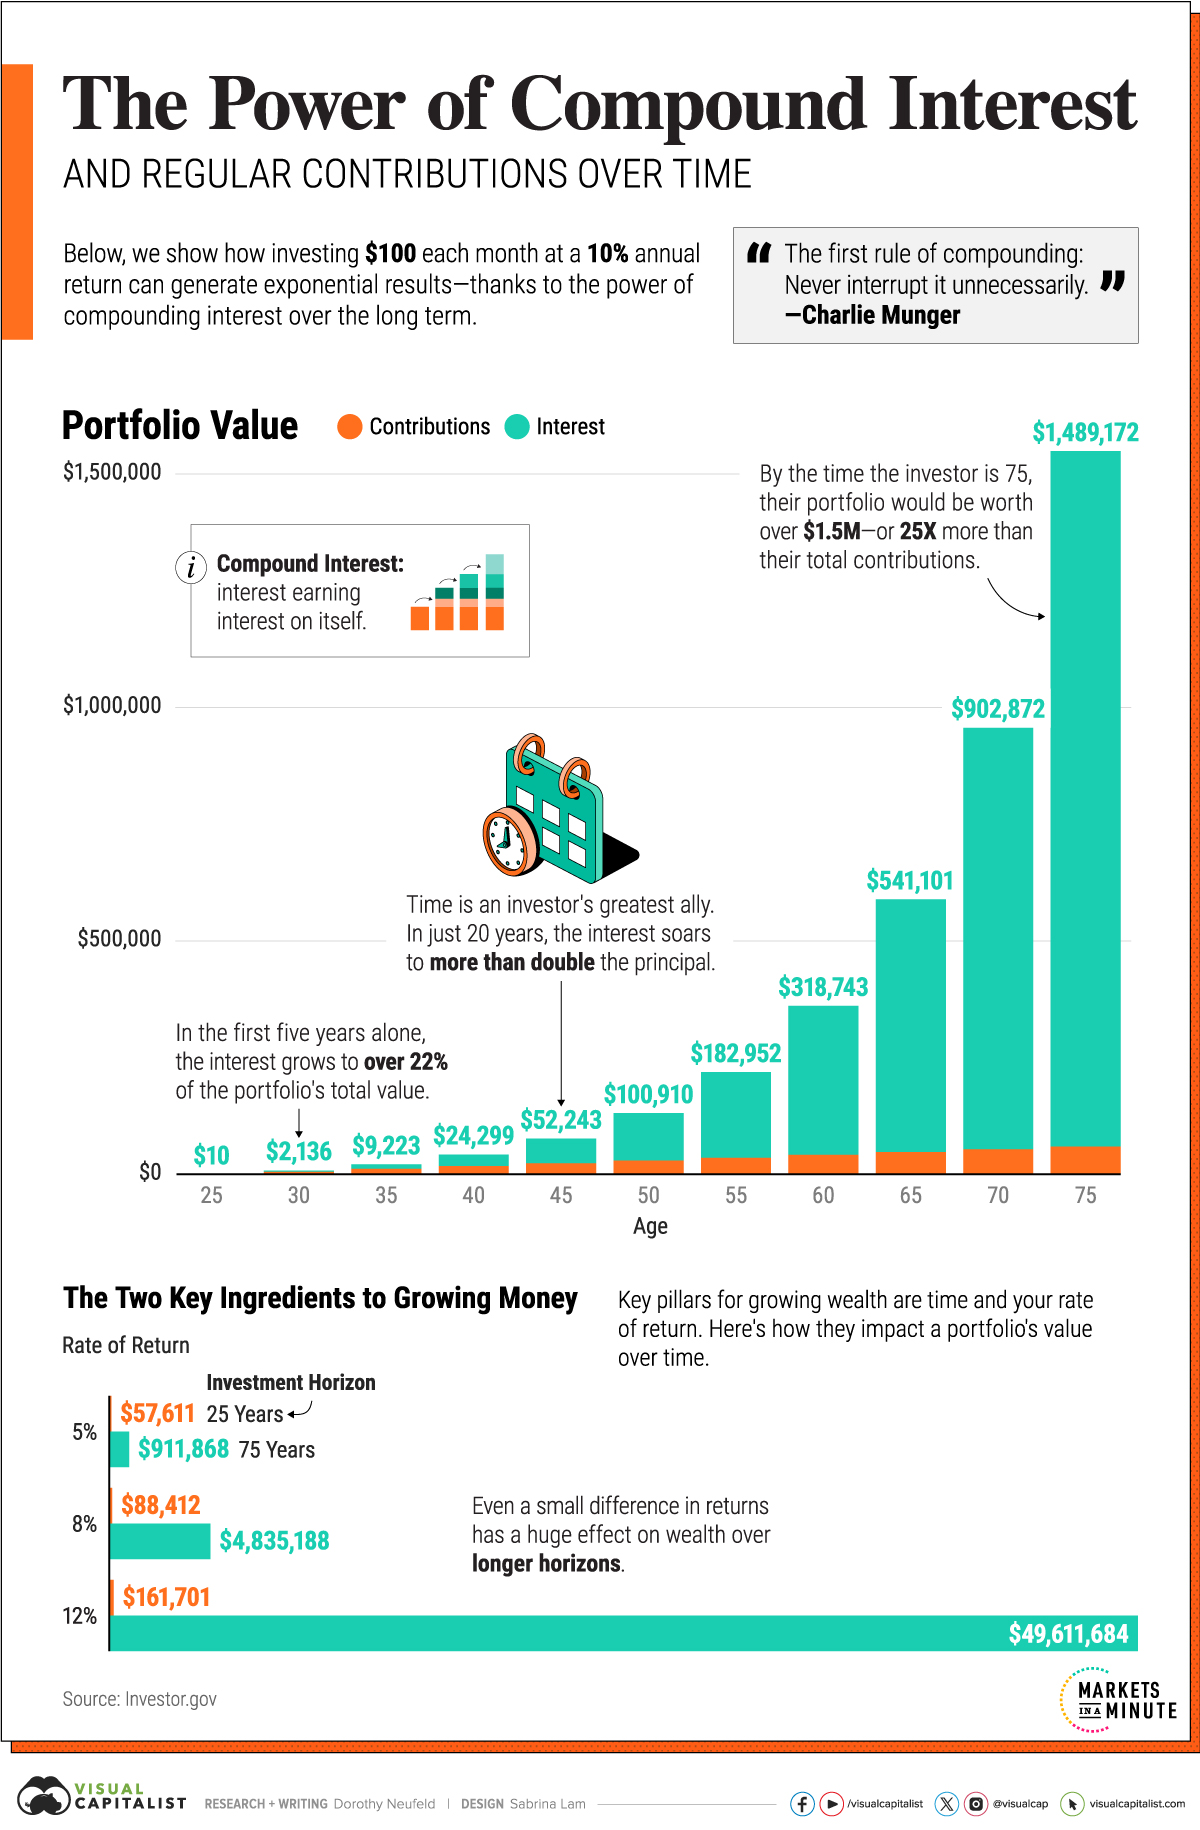 How Small Investments Make a Big Impact Over Time